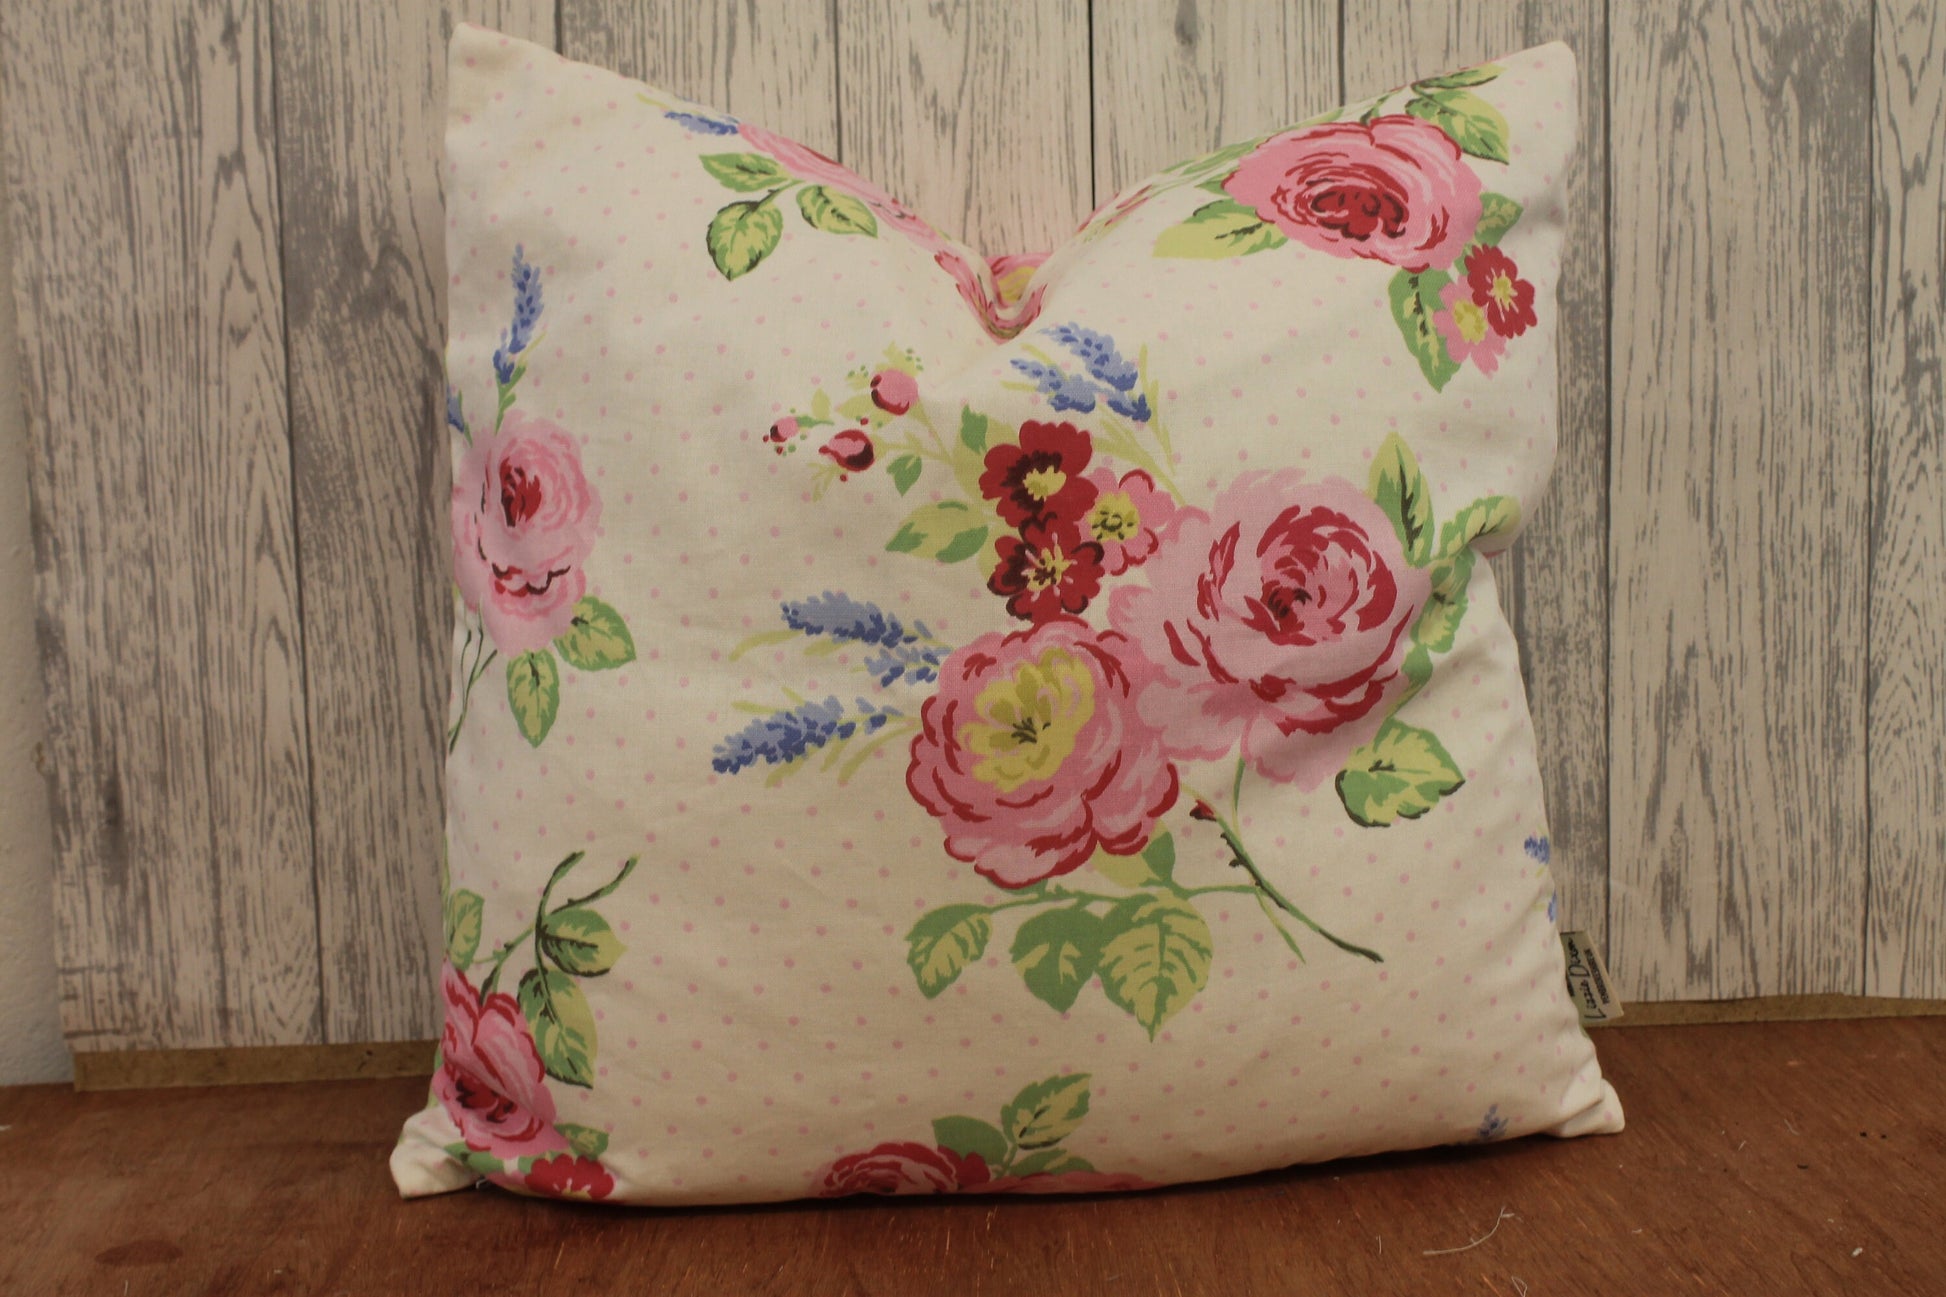 Floral Cushion 16"square cushion -Pink Rose and White Cushion -Shabby Chic-cottage chic-Decorative pillow - Scatter Cushion-double sided